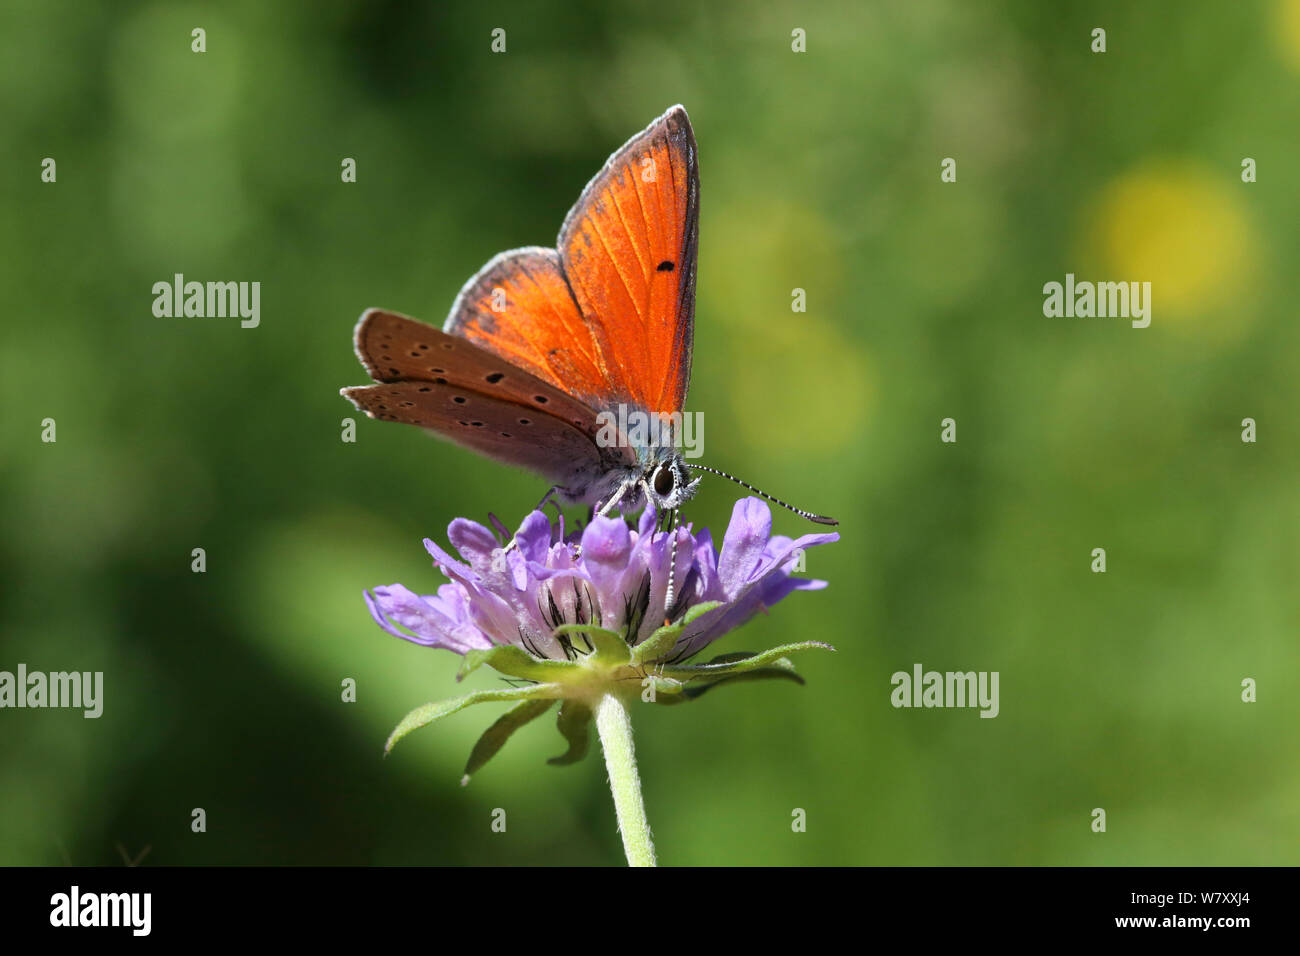 Purple-edged copper butterfly (Lycaena hippothoe) on Field scabious (Knautia arvensis) flower, France, July. Stock Photo